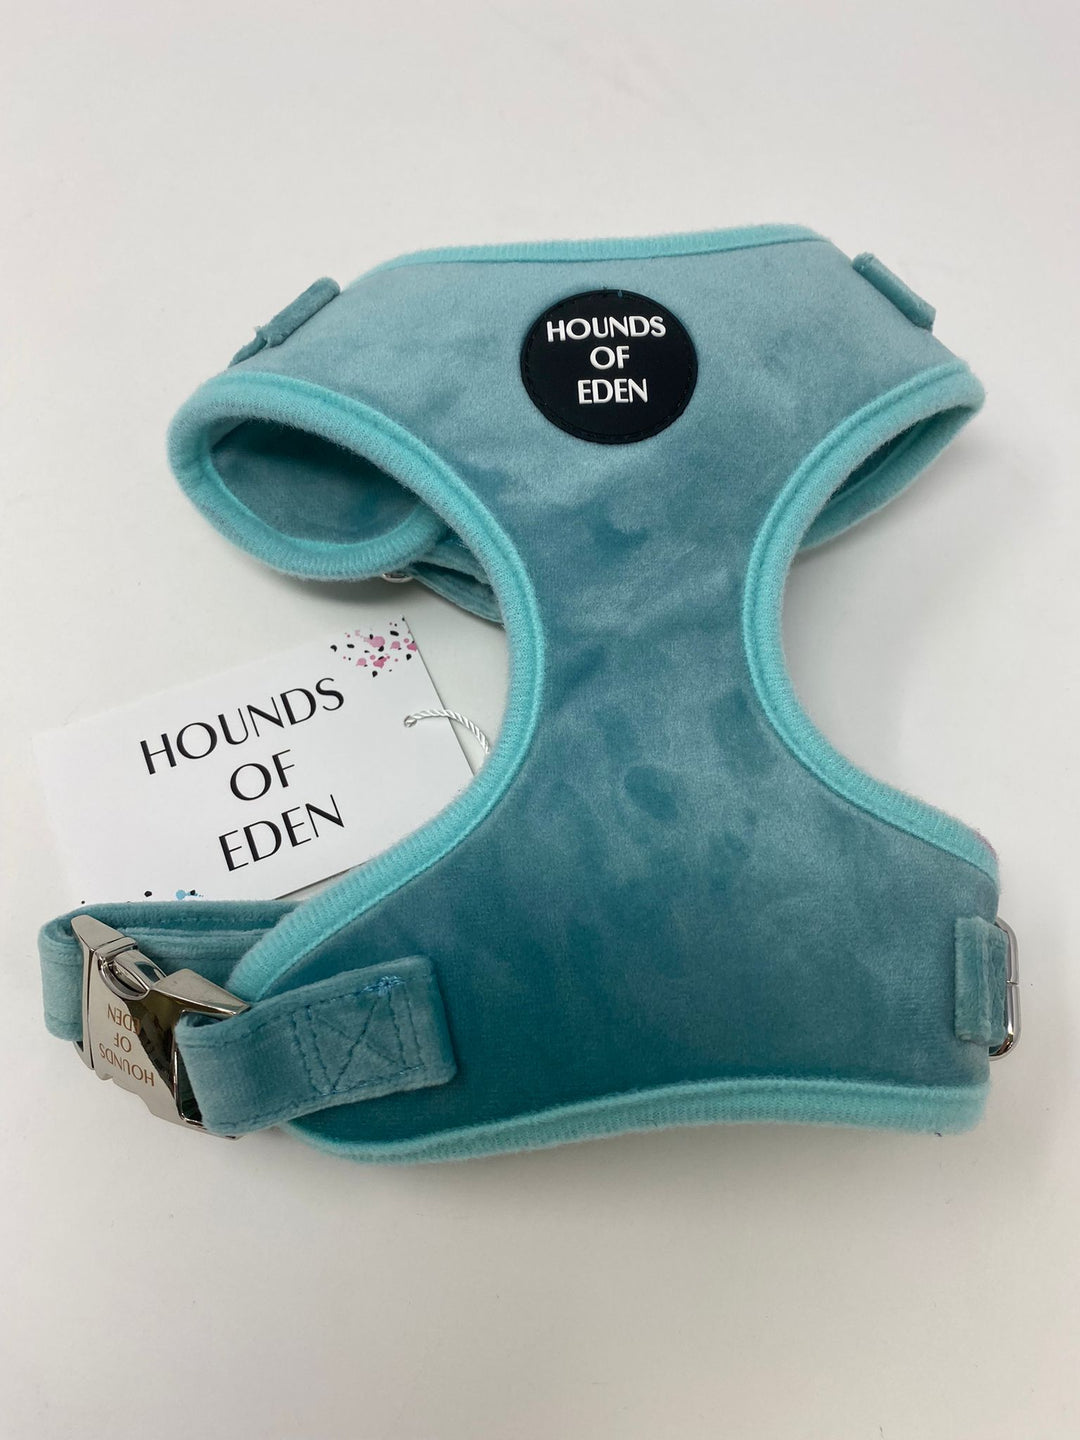 Outlet - XS TIFFANY'S - LIGHT TEAL VELVET DOG HARNESS WITH SILVER METAL HARDWARE - 0018